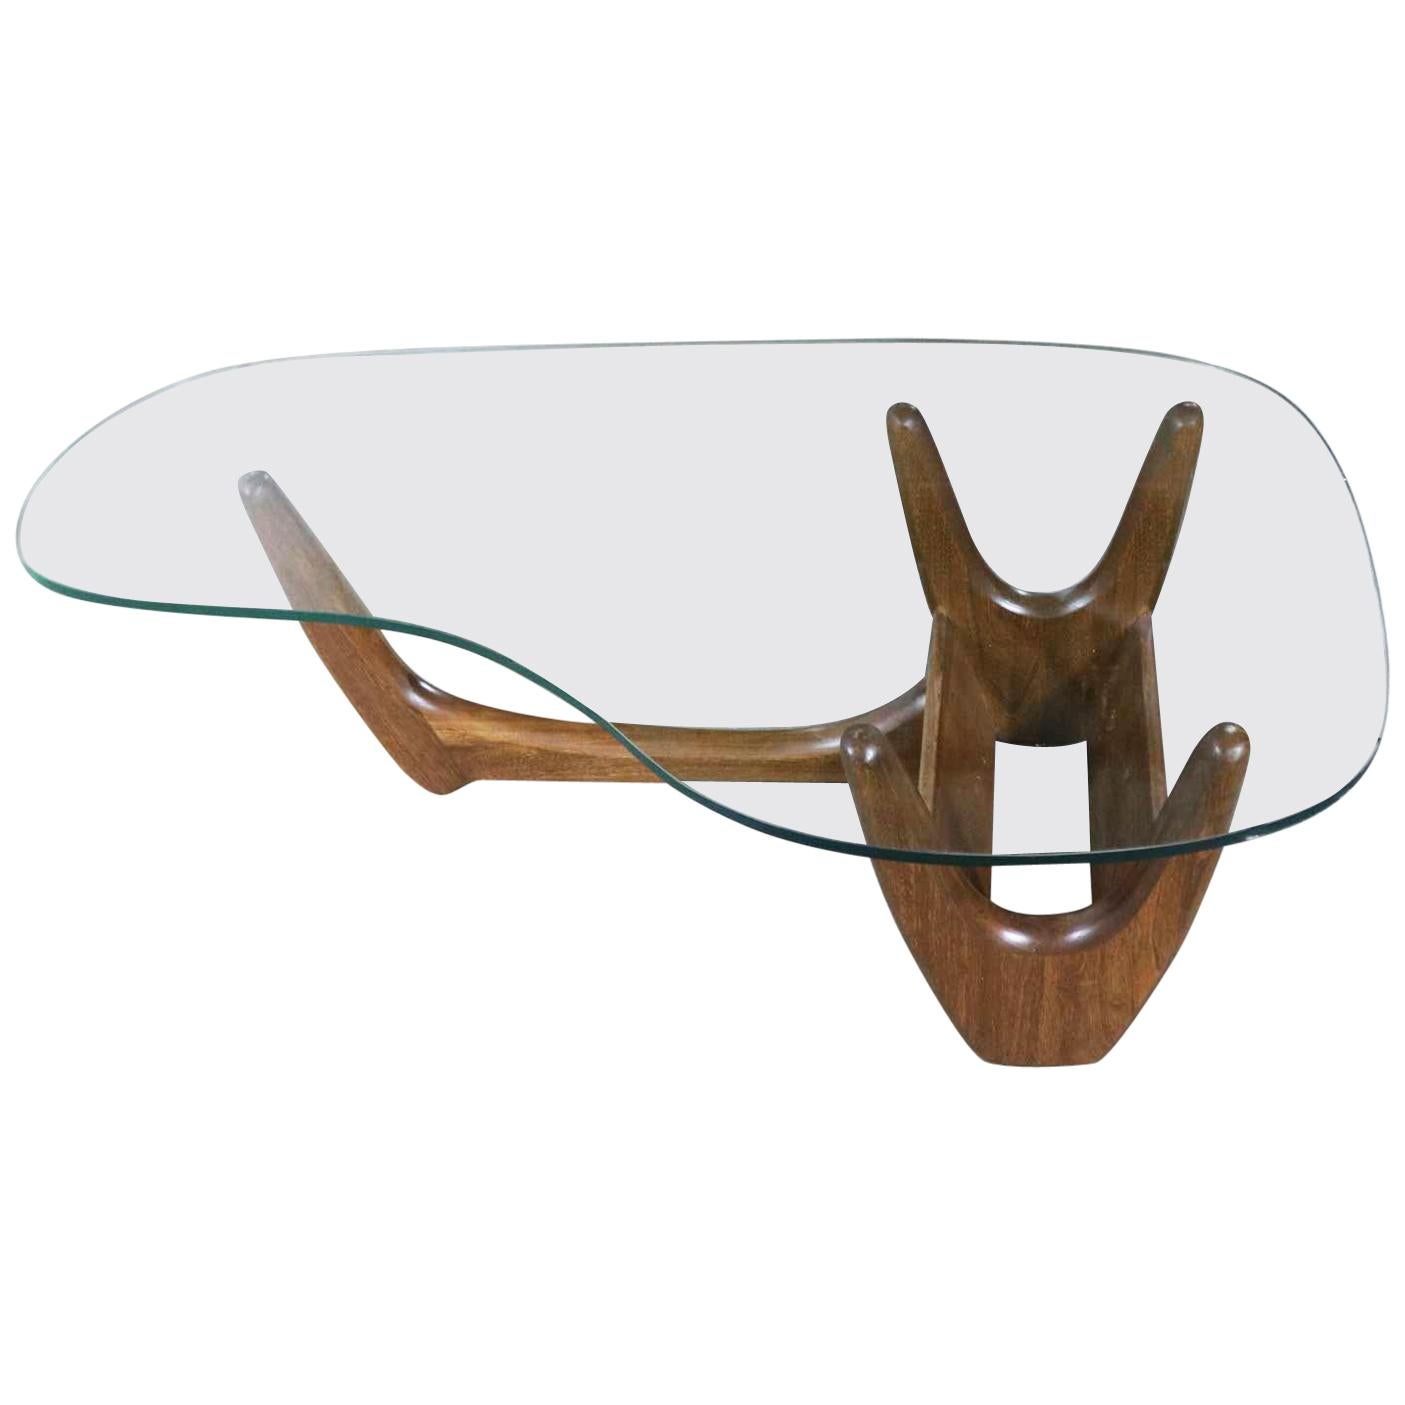 Mid-Century Modern Biomorphic Coffee Table Attributed to Kroehler or Tonk